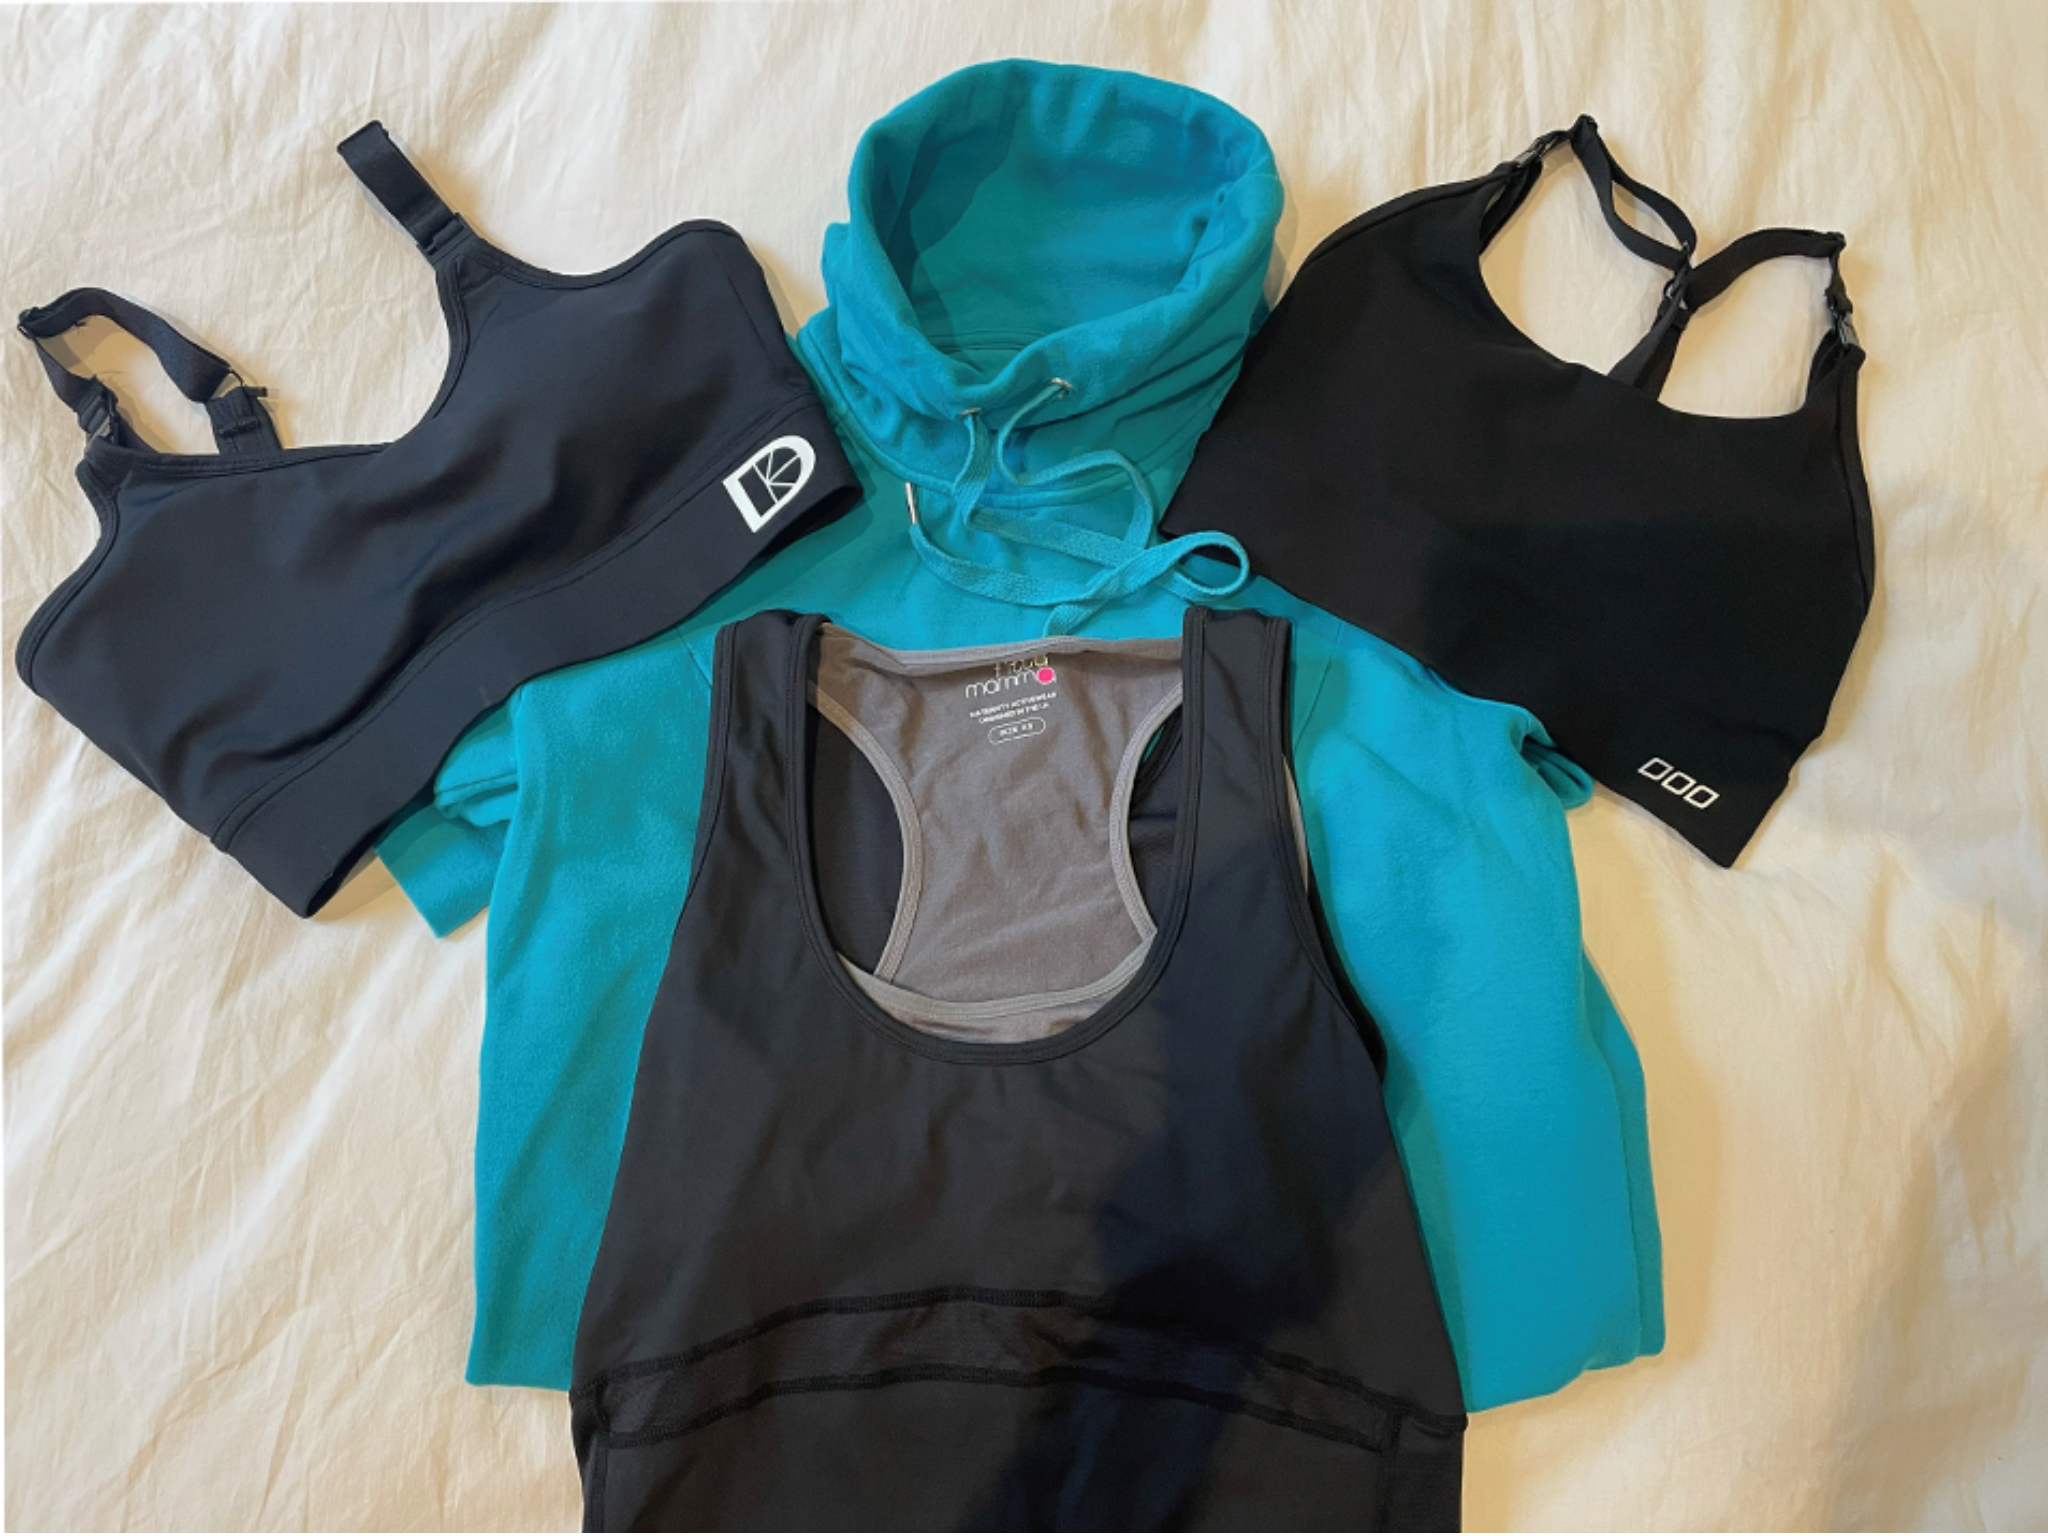 A selection of the tried and tested maternity sportswear